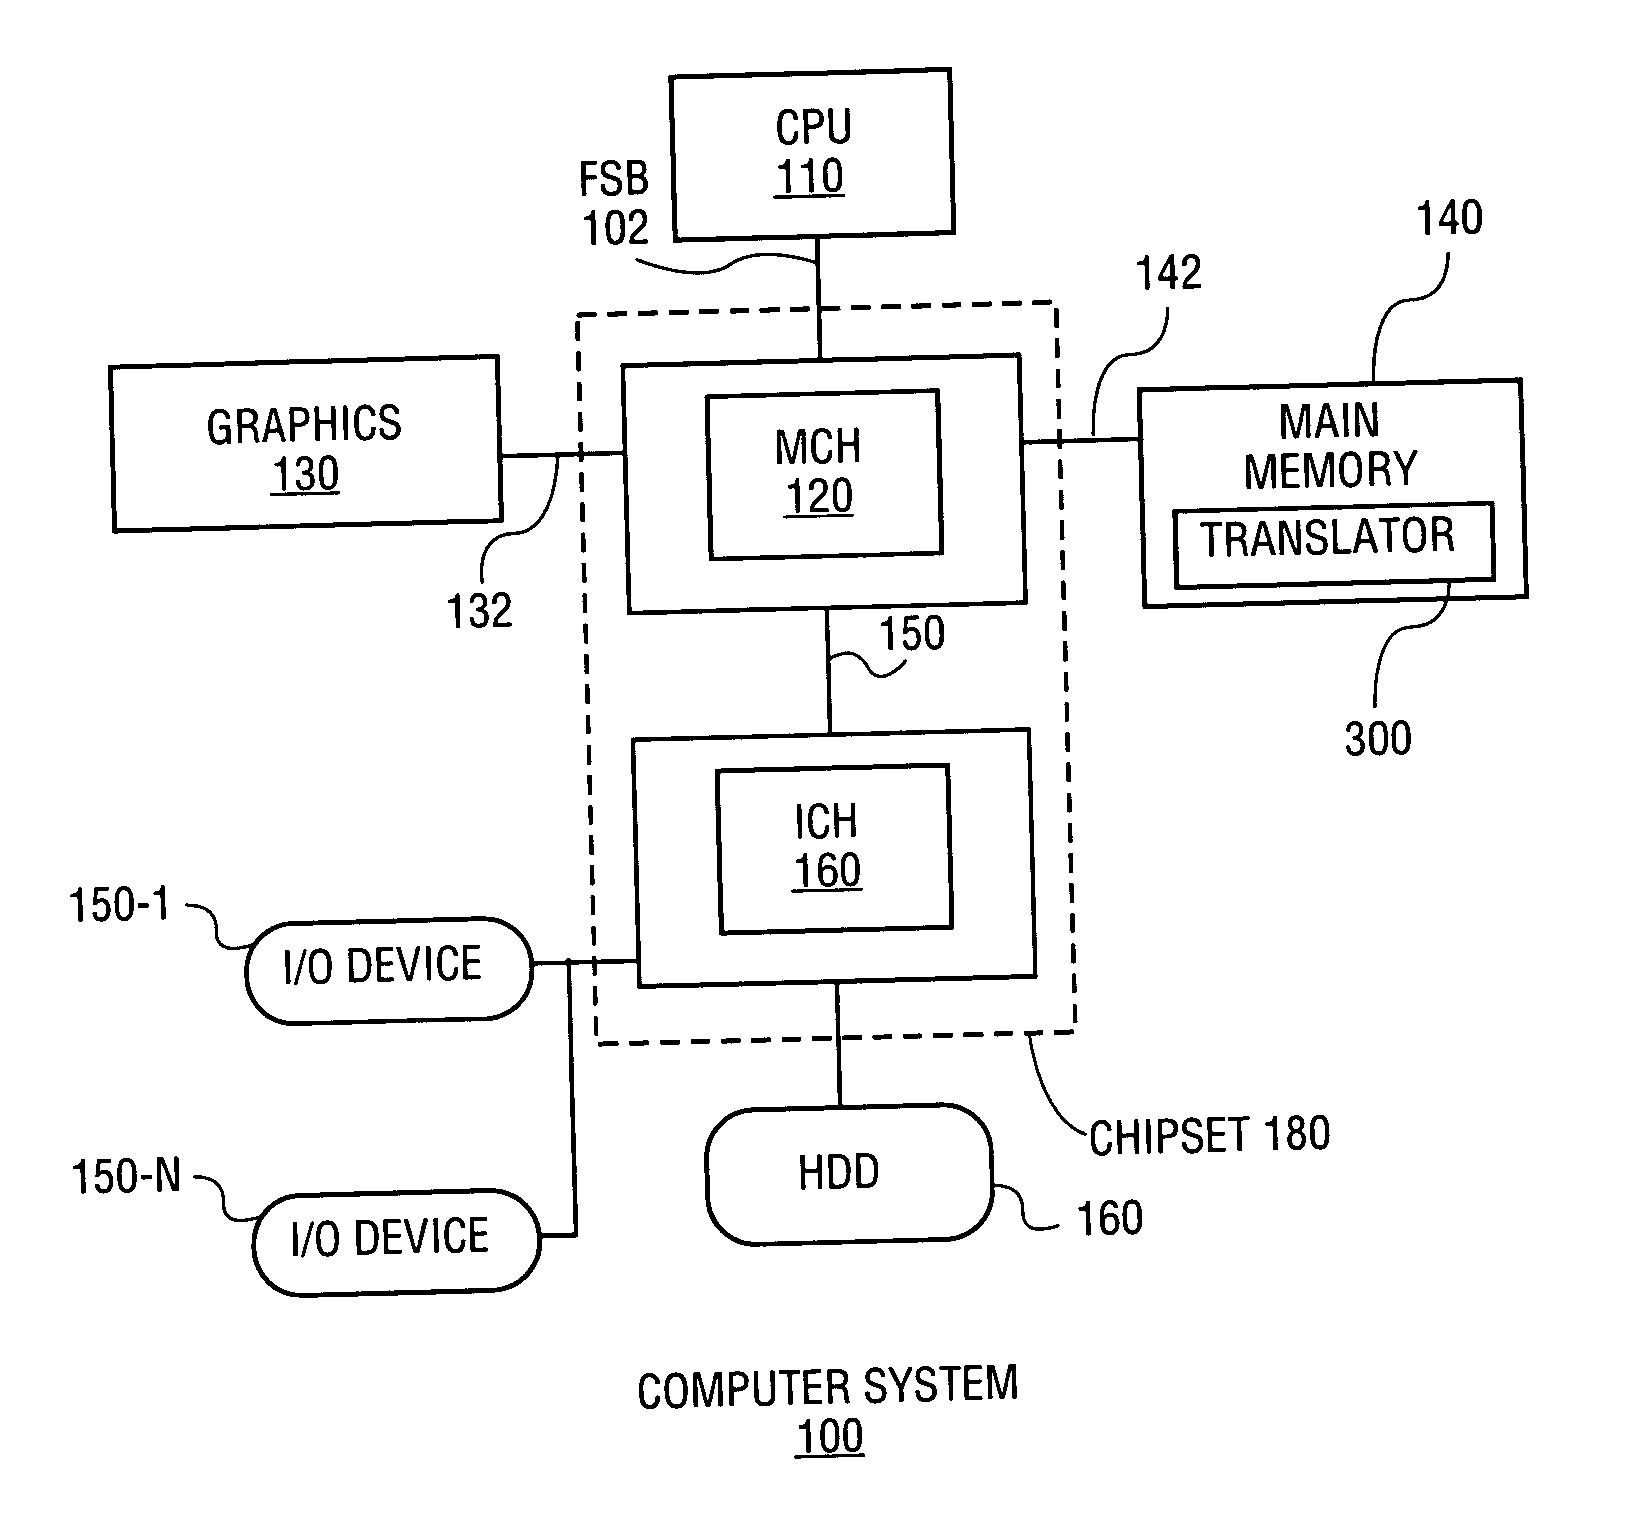 Apparatus and method for simulating segmented addressing on a flat memory model architecture